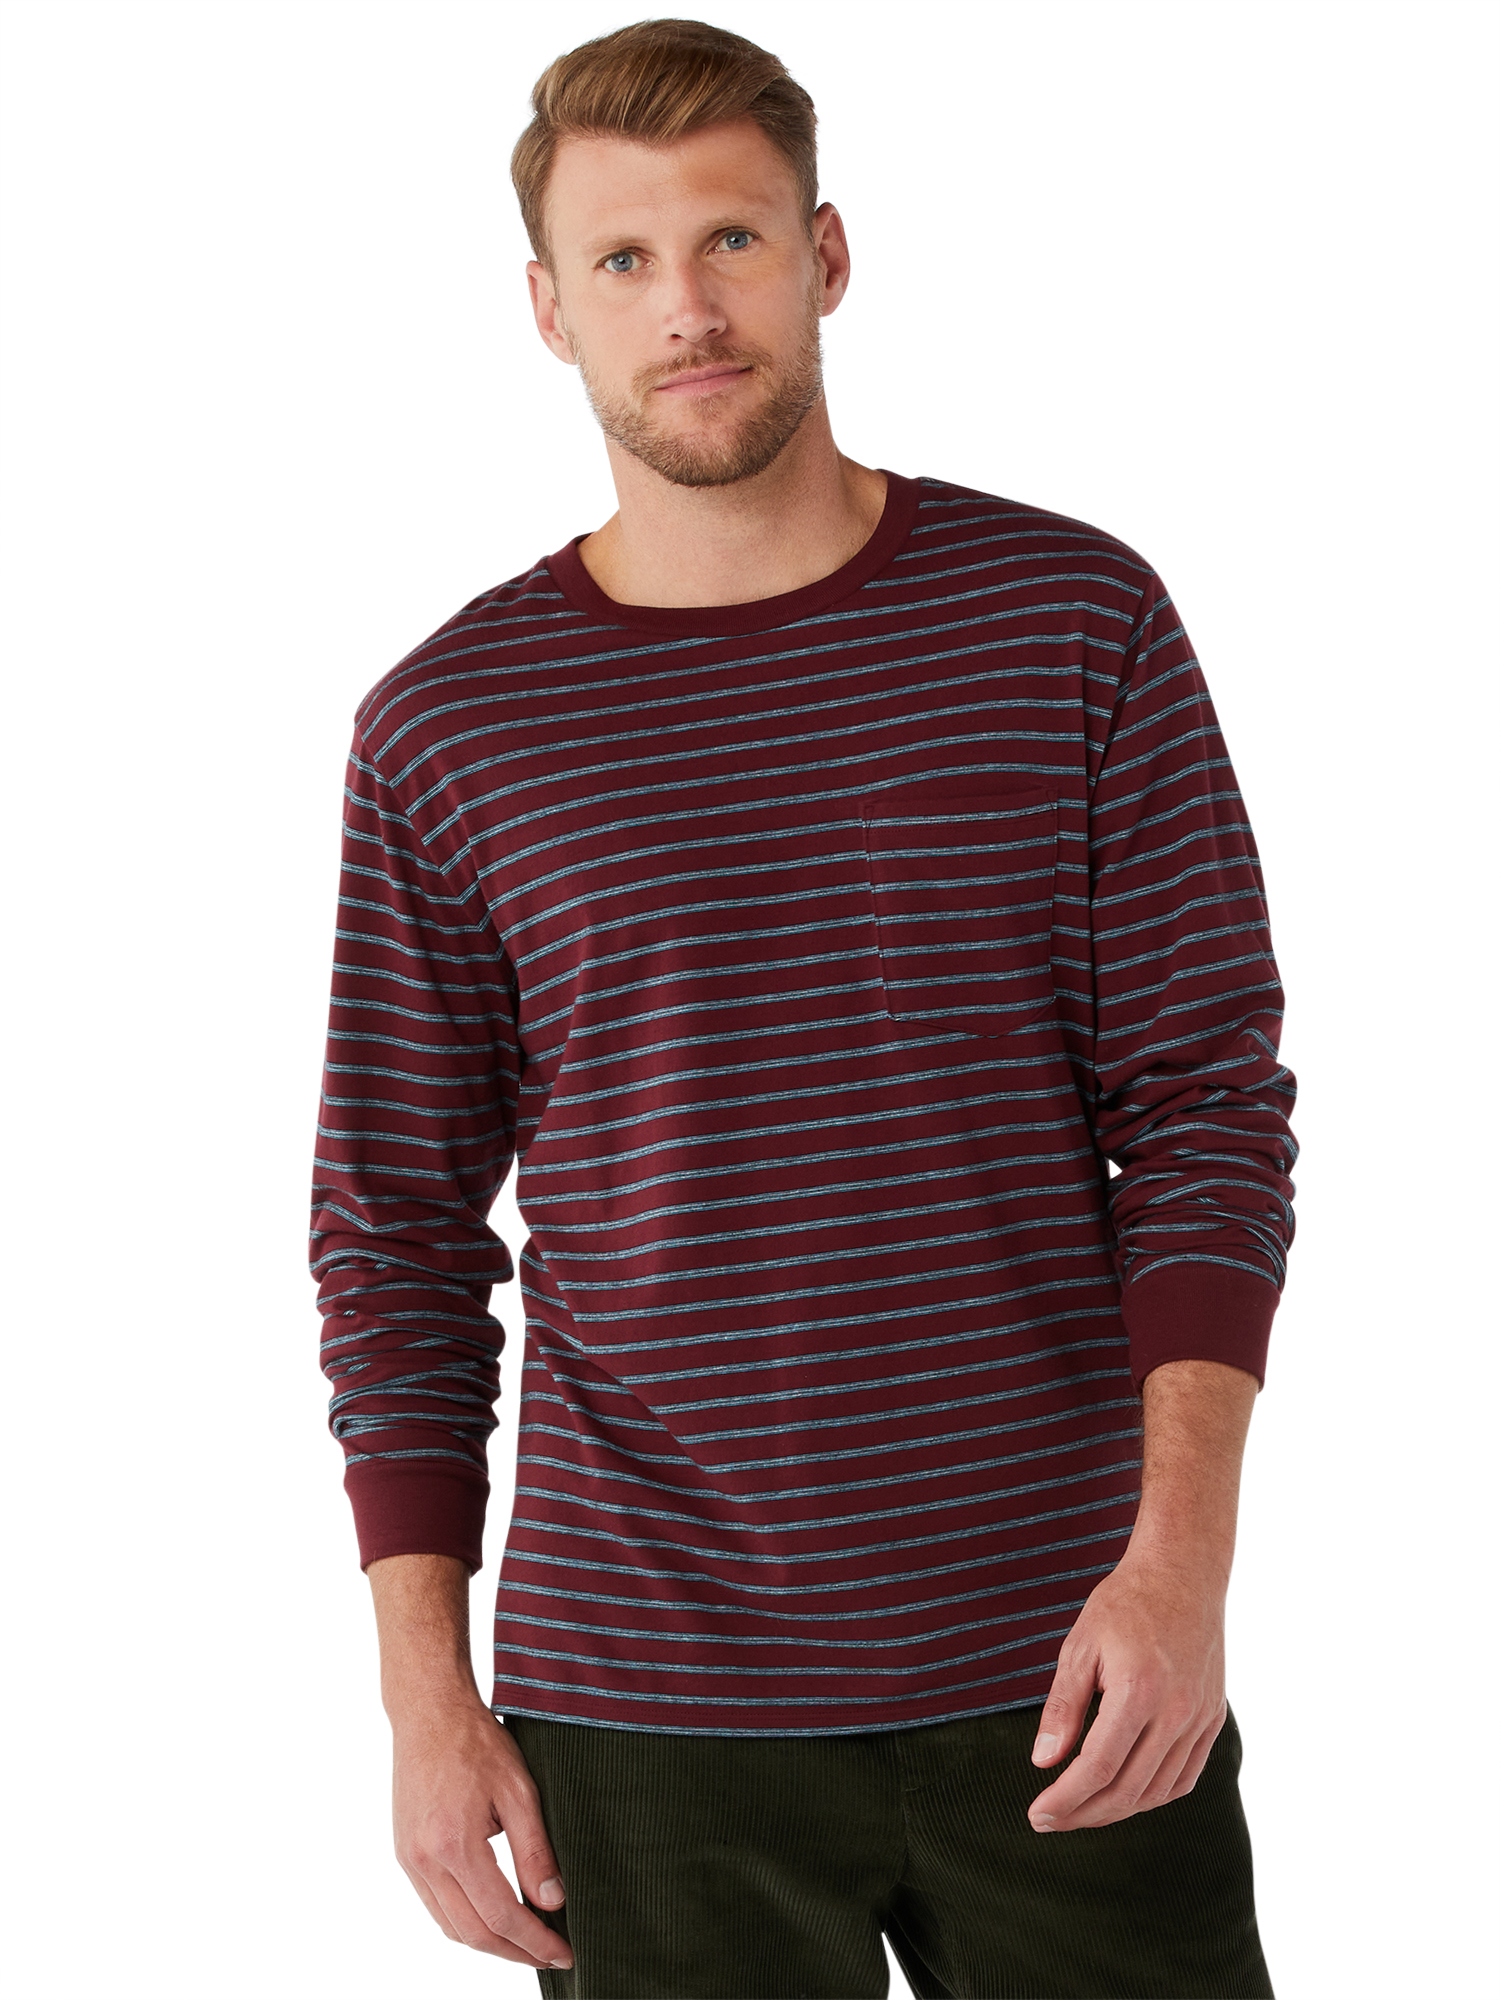 Free Assembly Men's Everyday Long Sleeve Pocket Tee - image 1 of 6